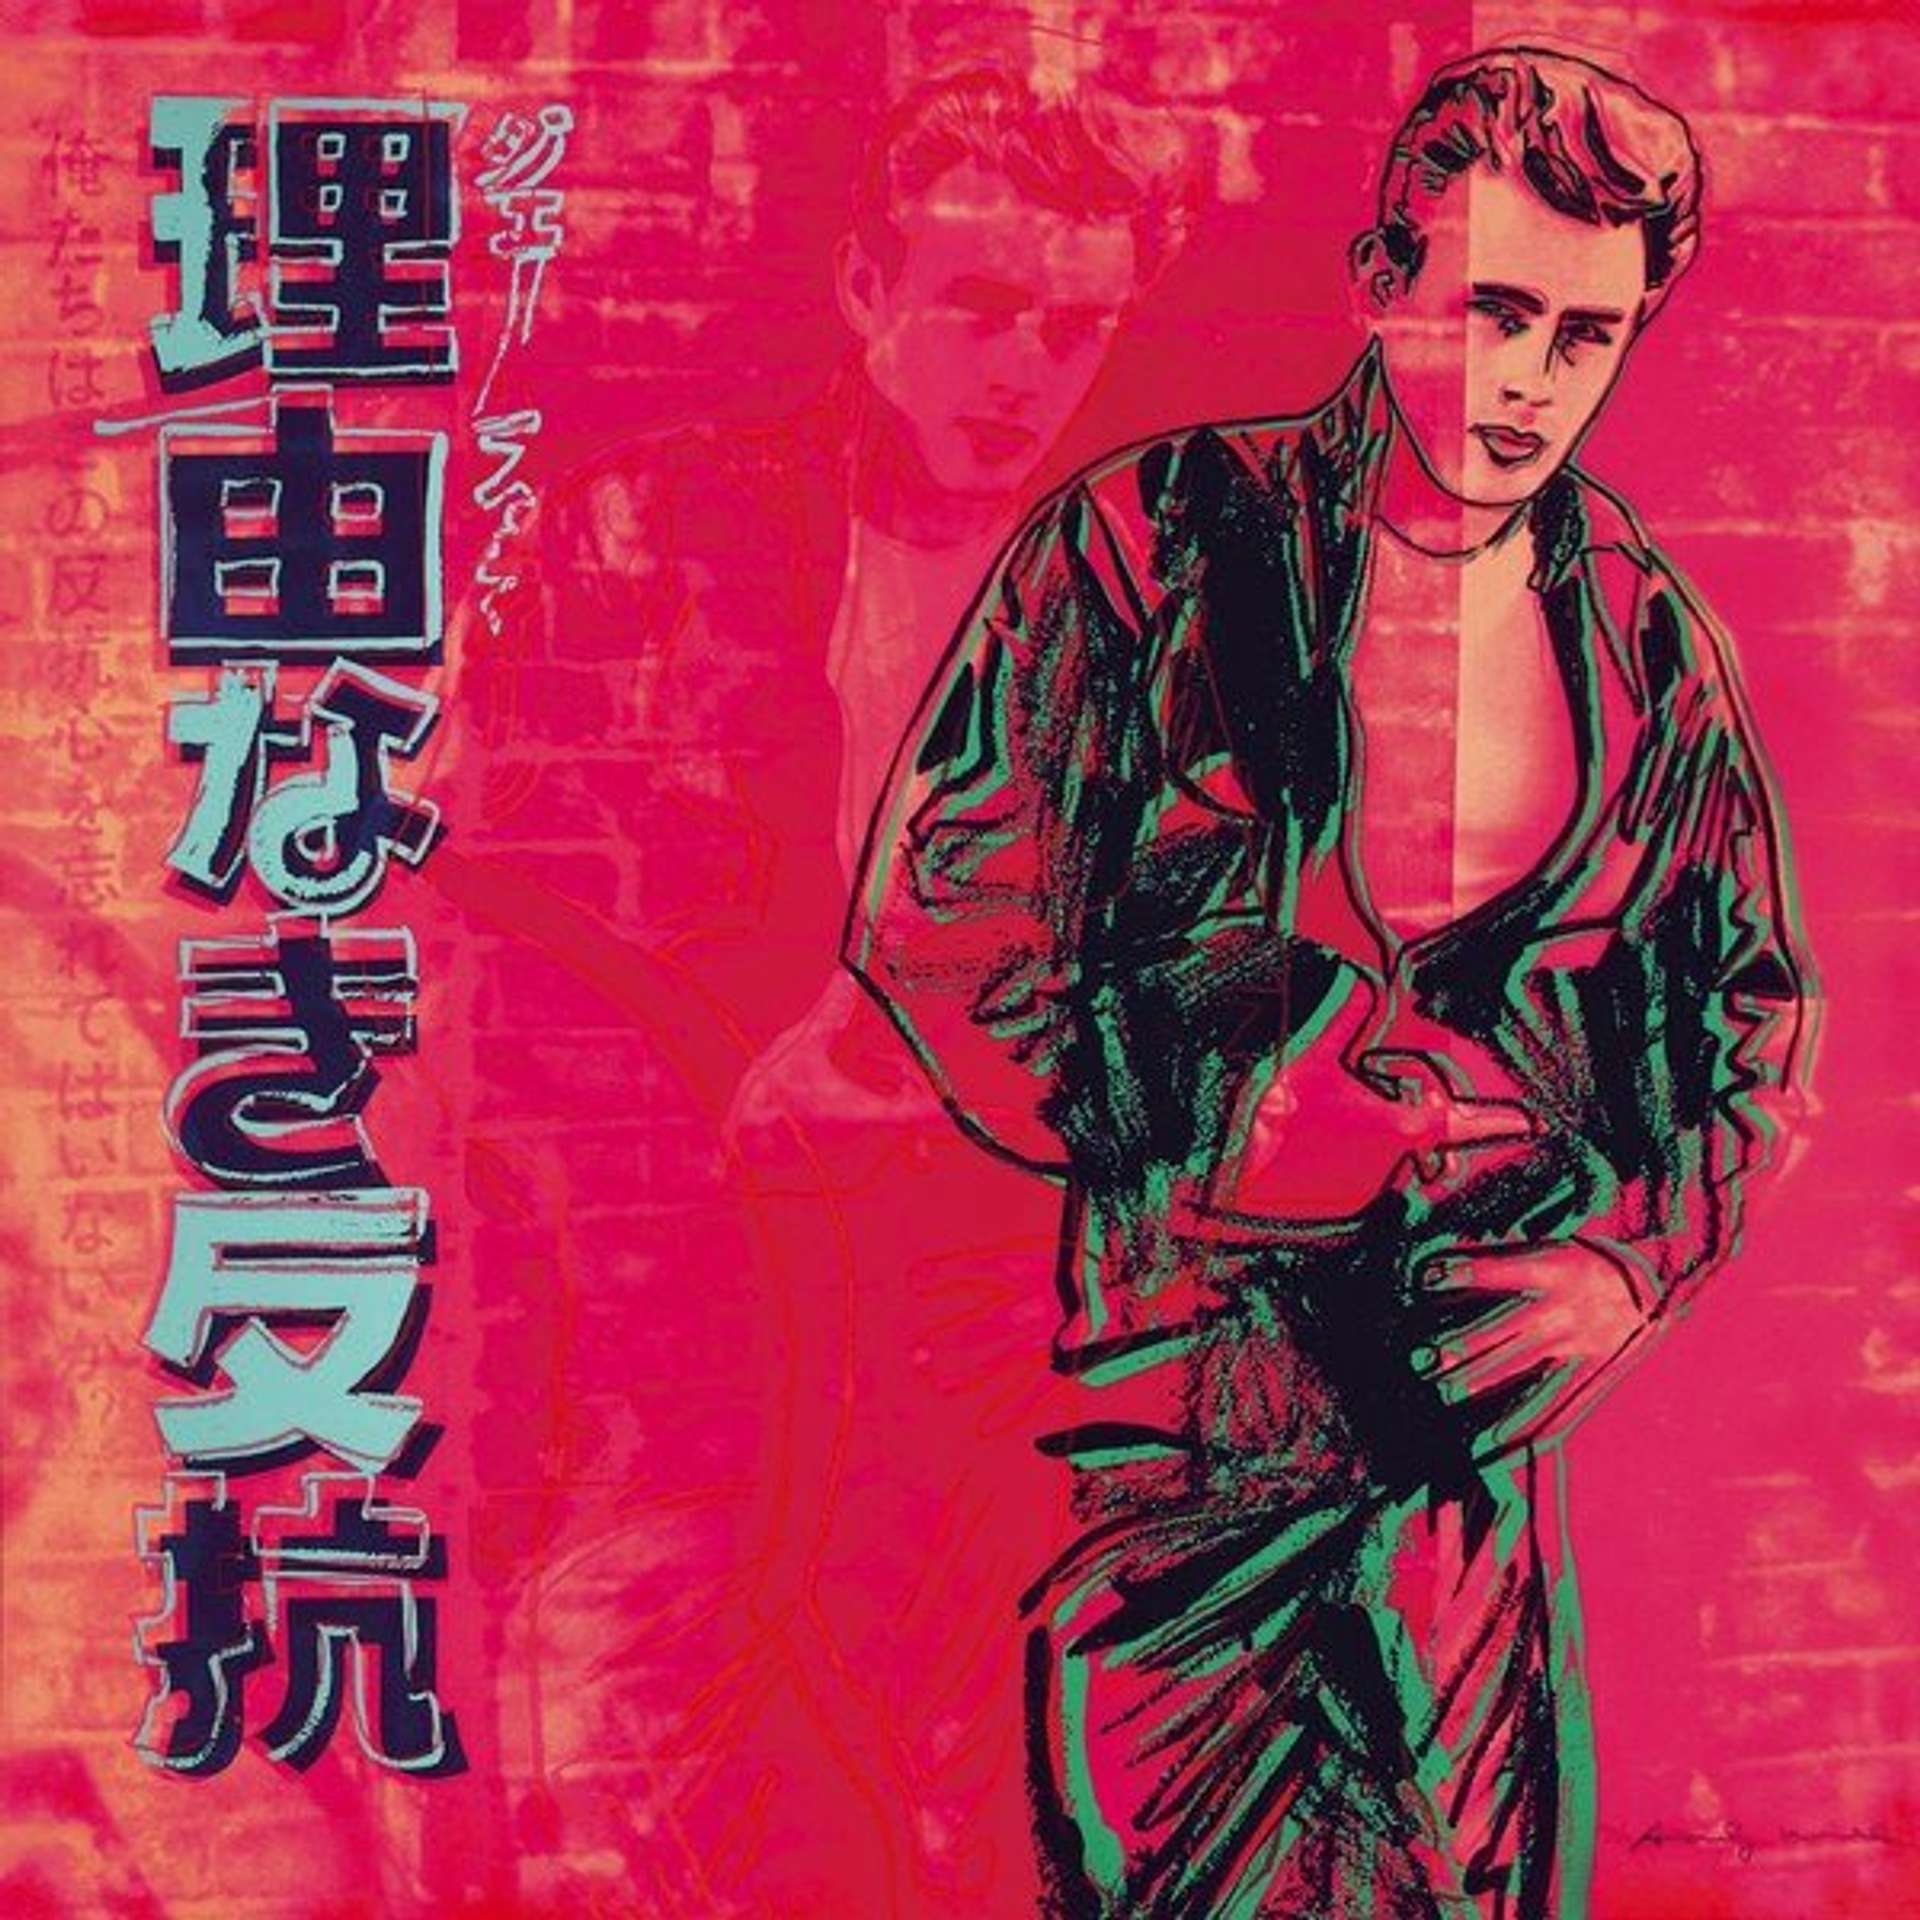 Rebel Without A Cause (James Dean) (F. & S. II.355) by Andy Warhol